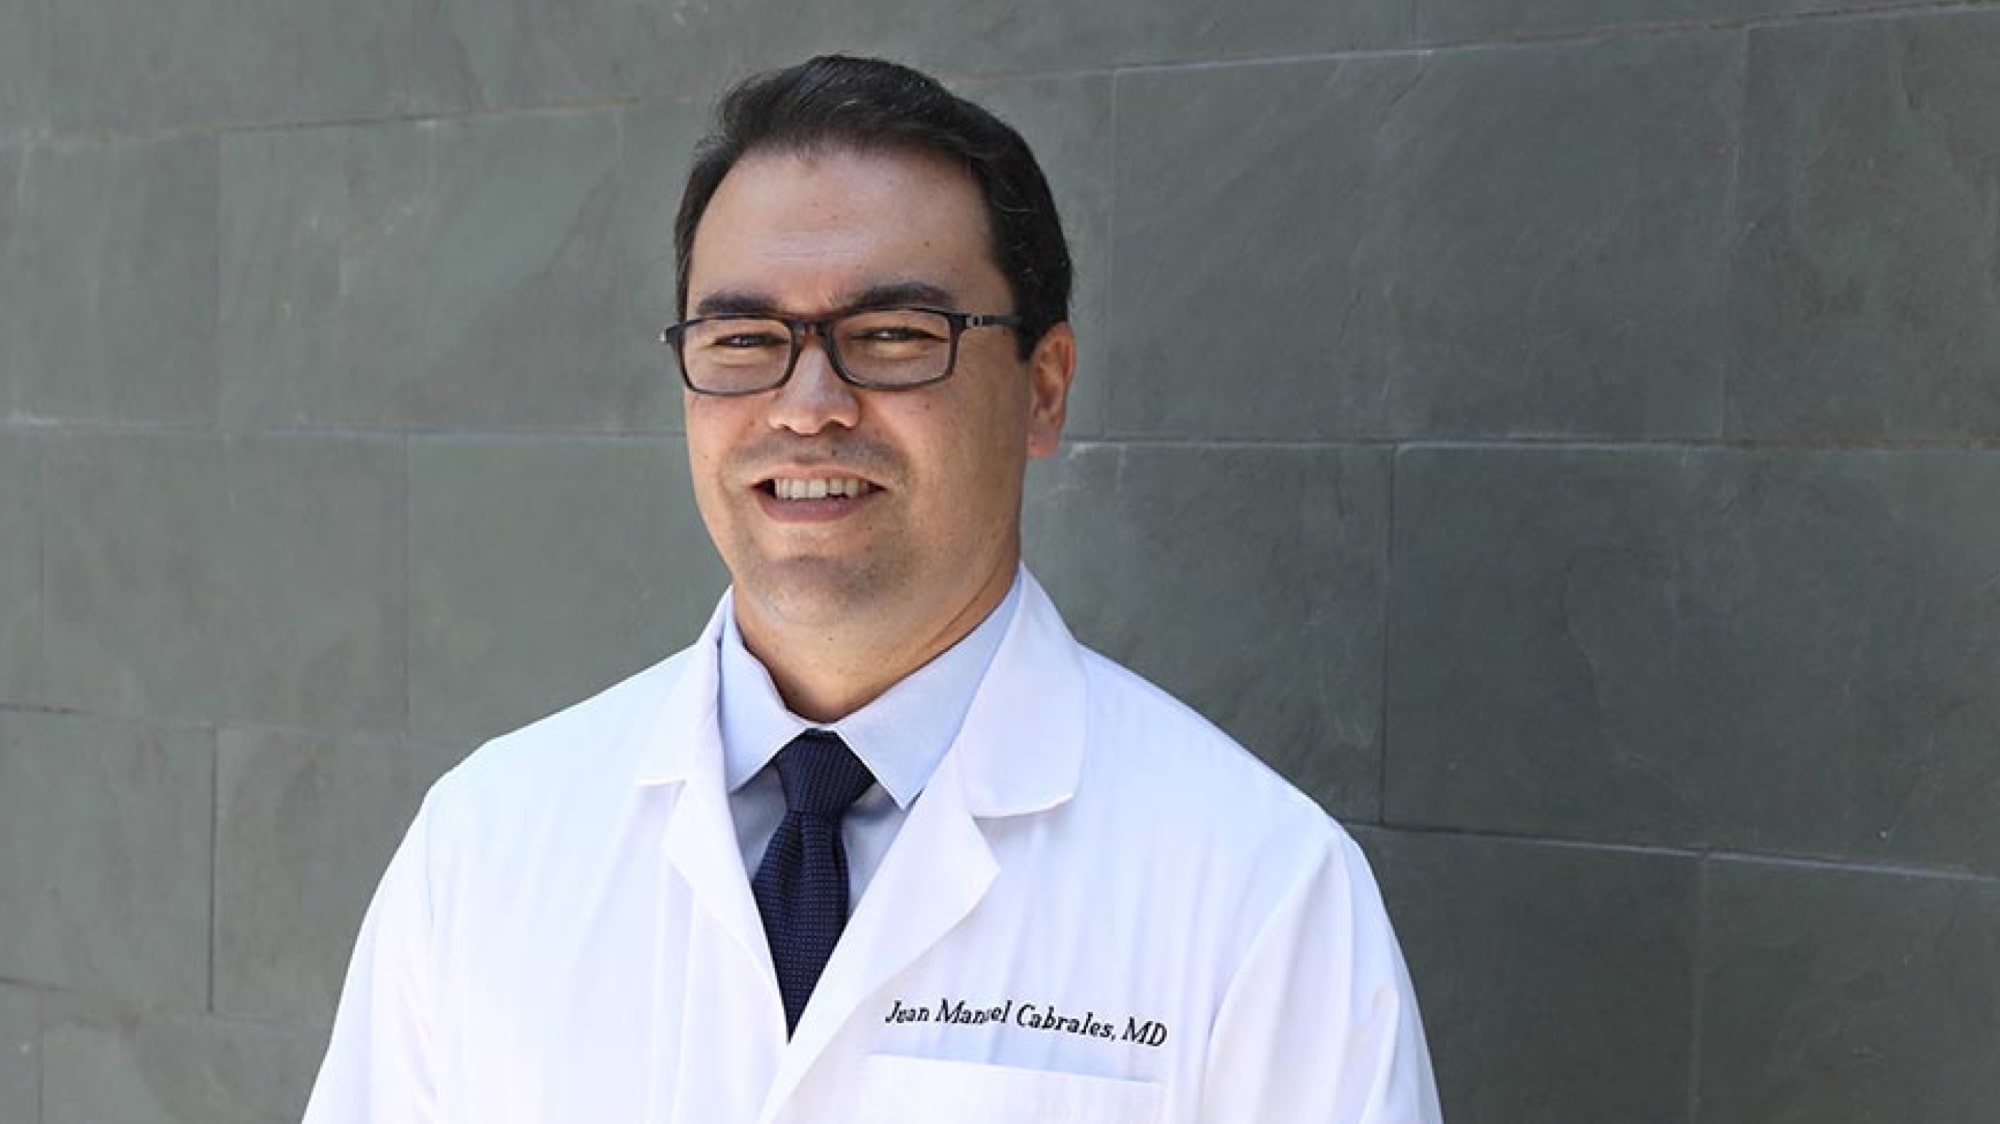 Smiling portrait of young Latino doctor Dr. Juan Cabrales